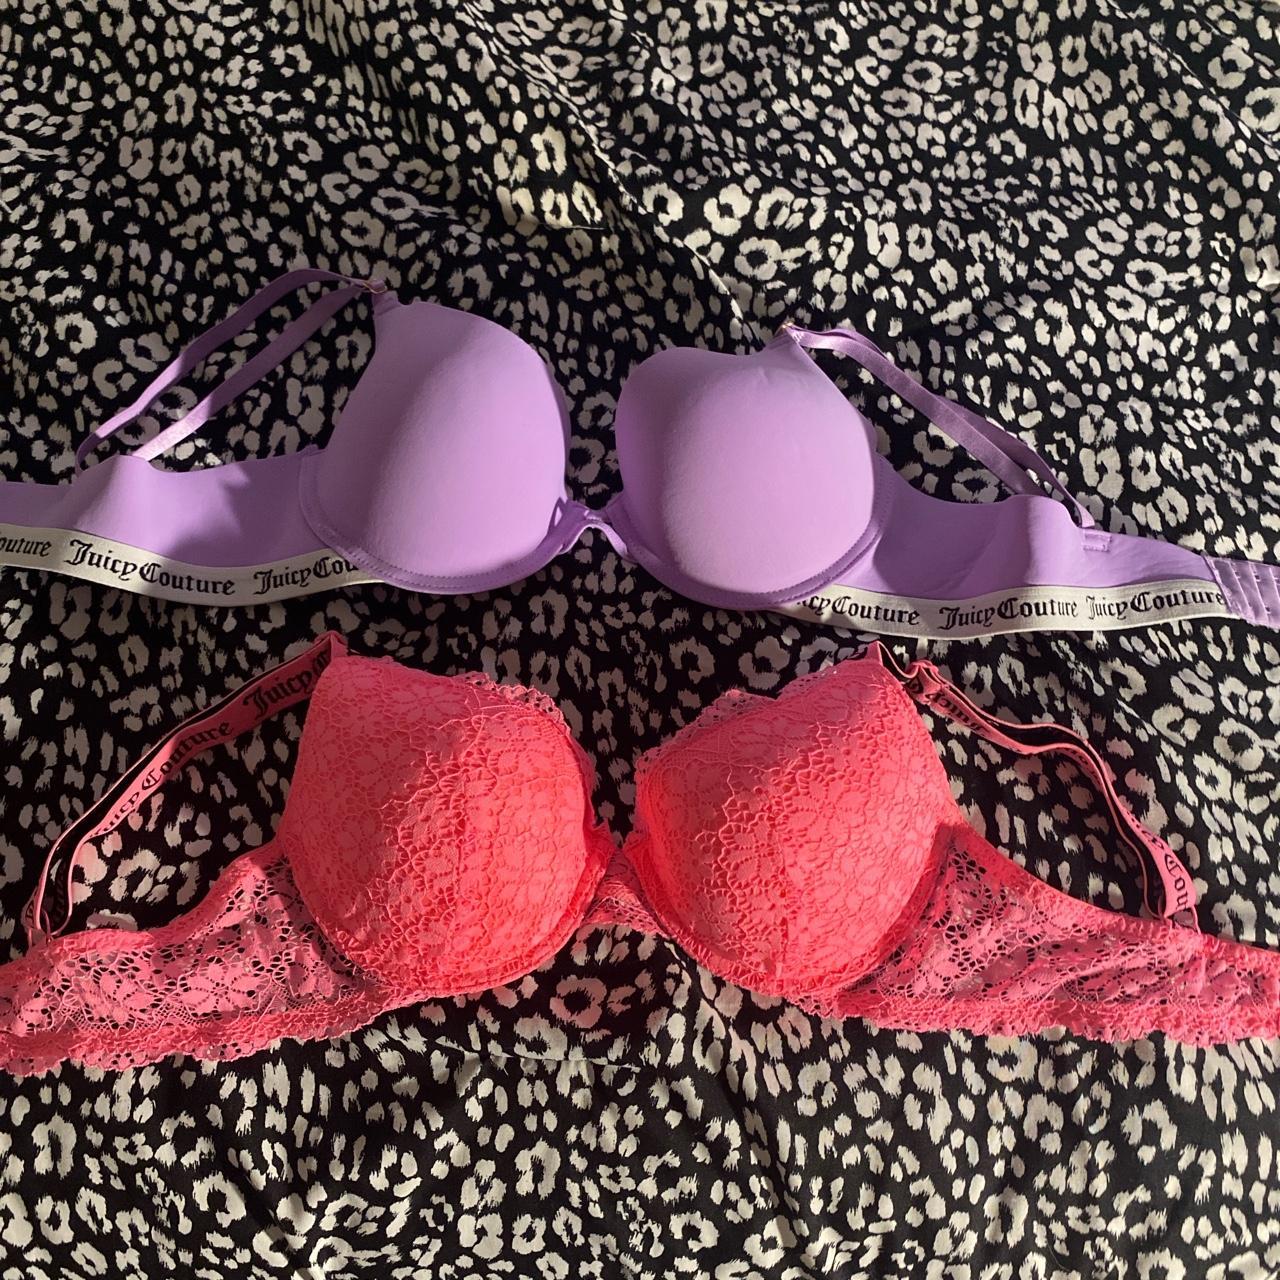 Juicy Couture push-up bras So cute and flattering - Depop